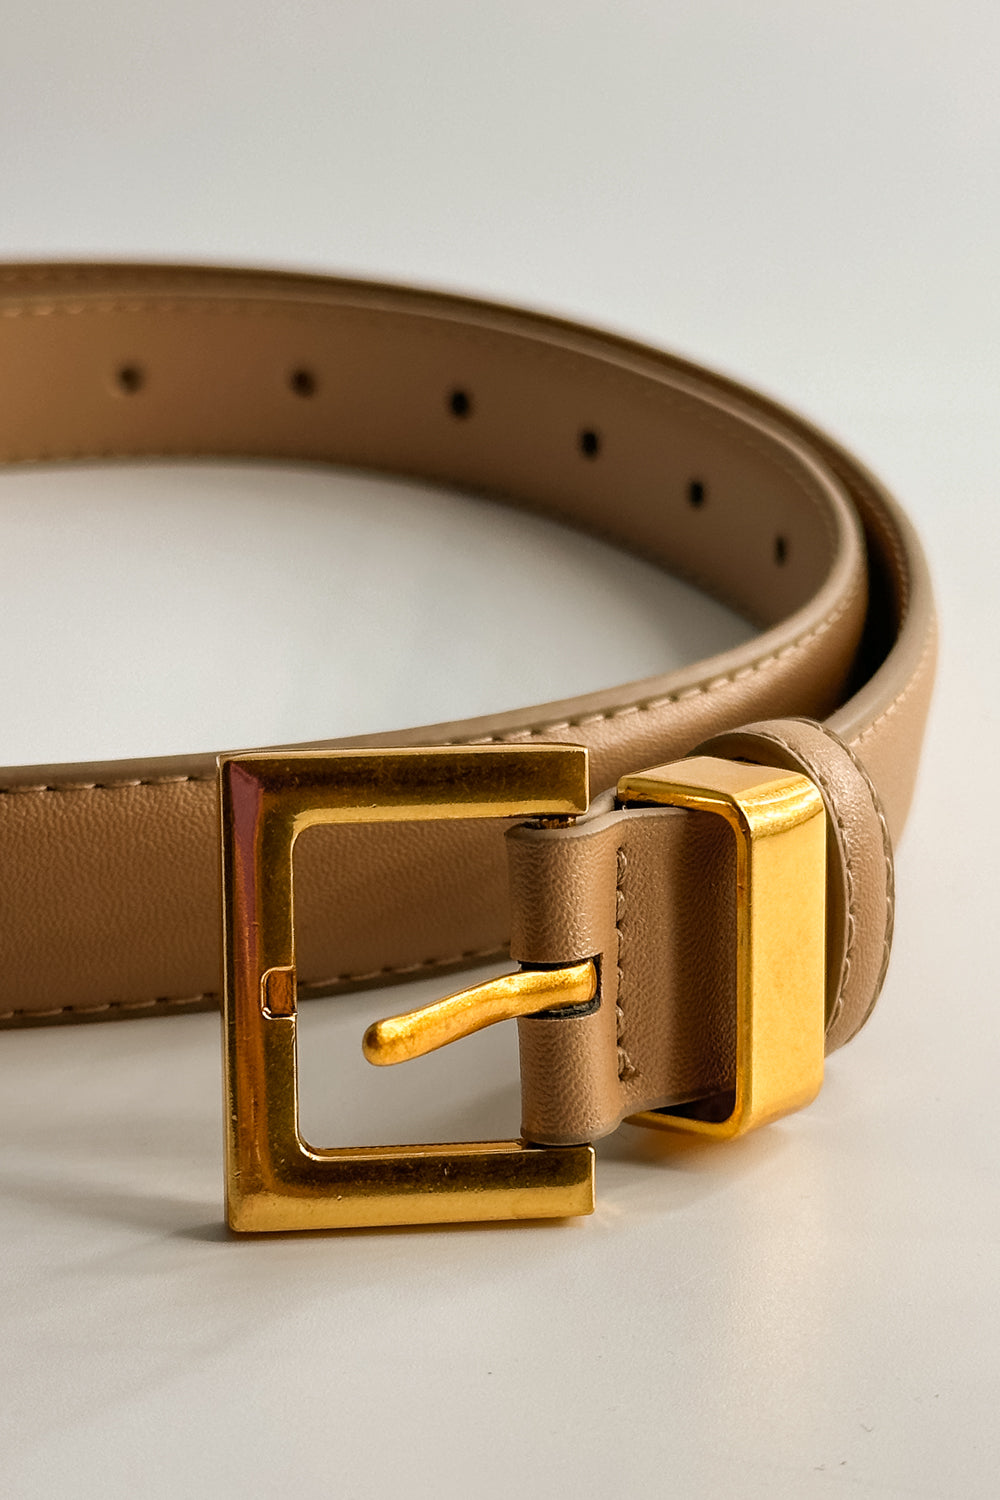 Close up view of the Iris Taupe Slim Square Buckle Belt which features taupe Leather Fabric and Gold Square Adjustable Buckle